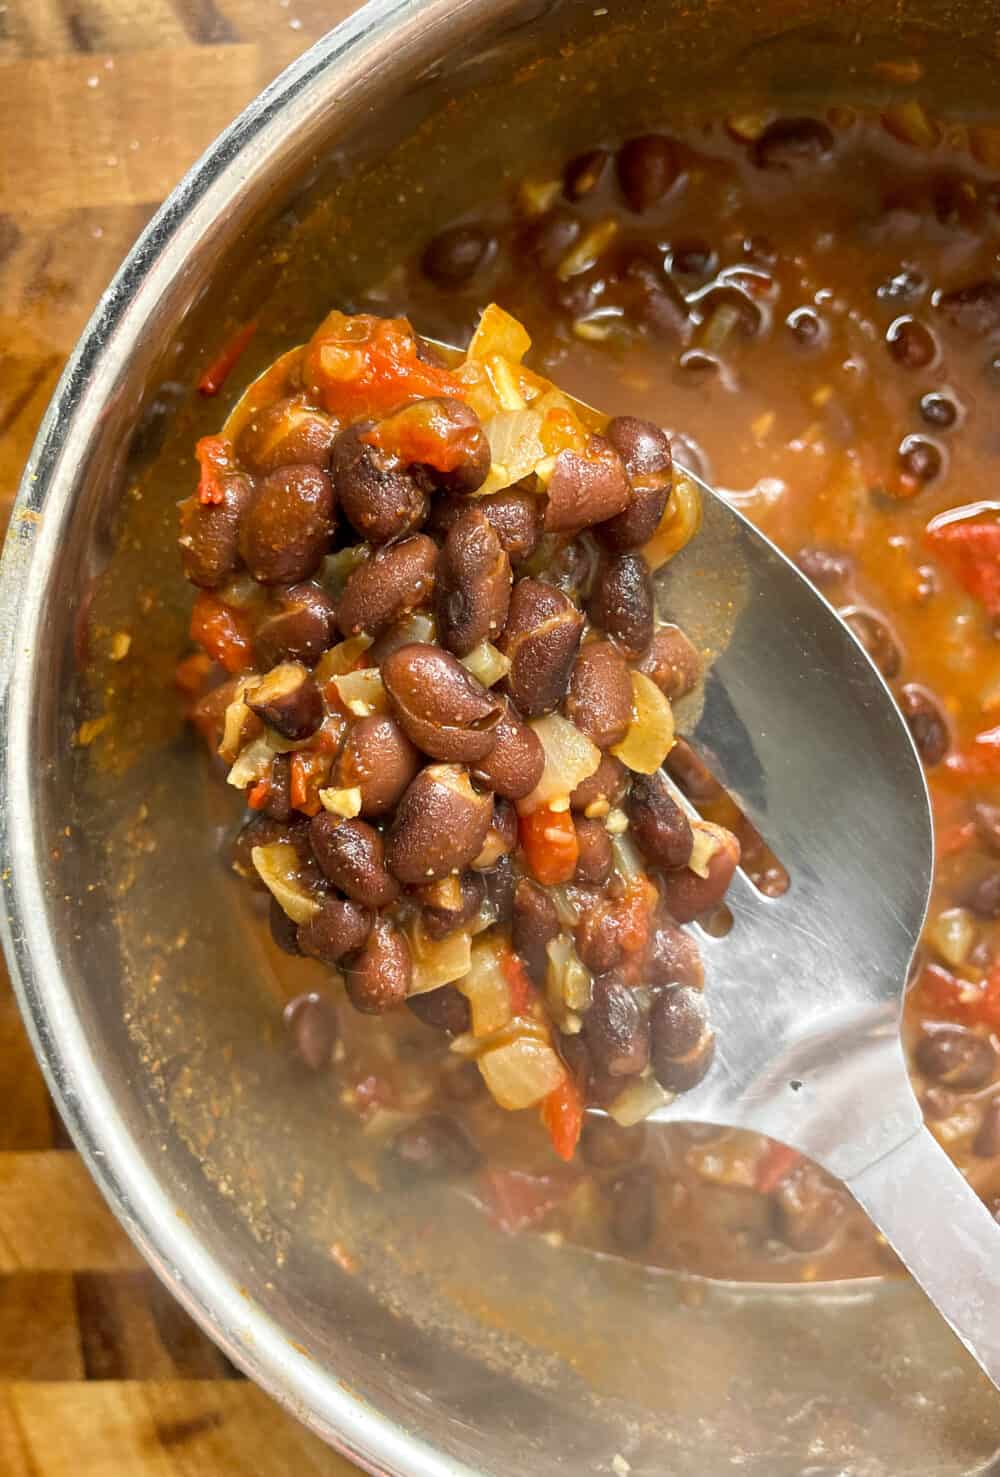 A pot of black beans simmered with tomatoes, onions and spices.